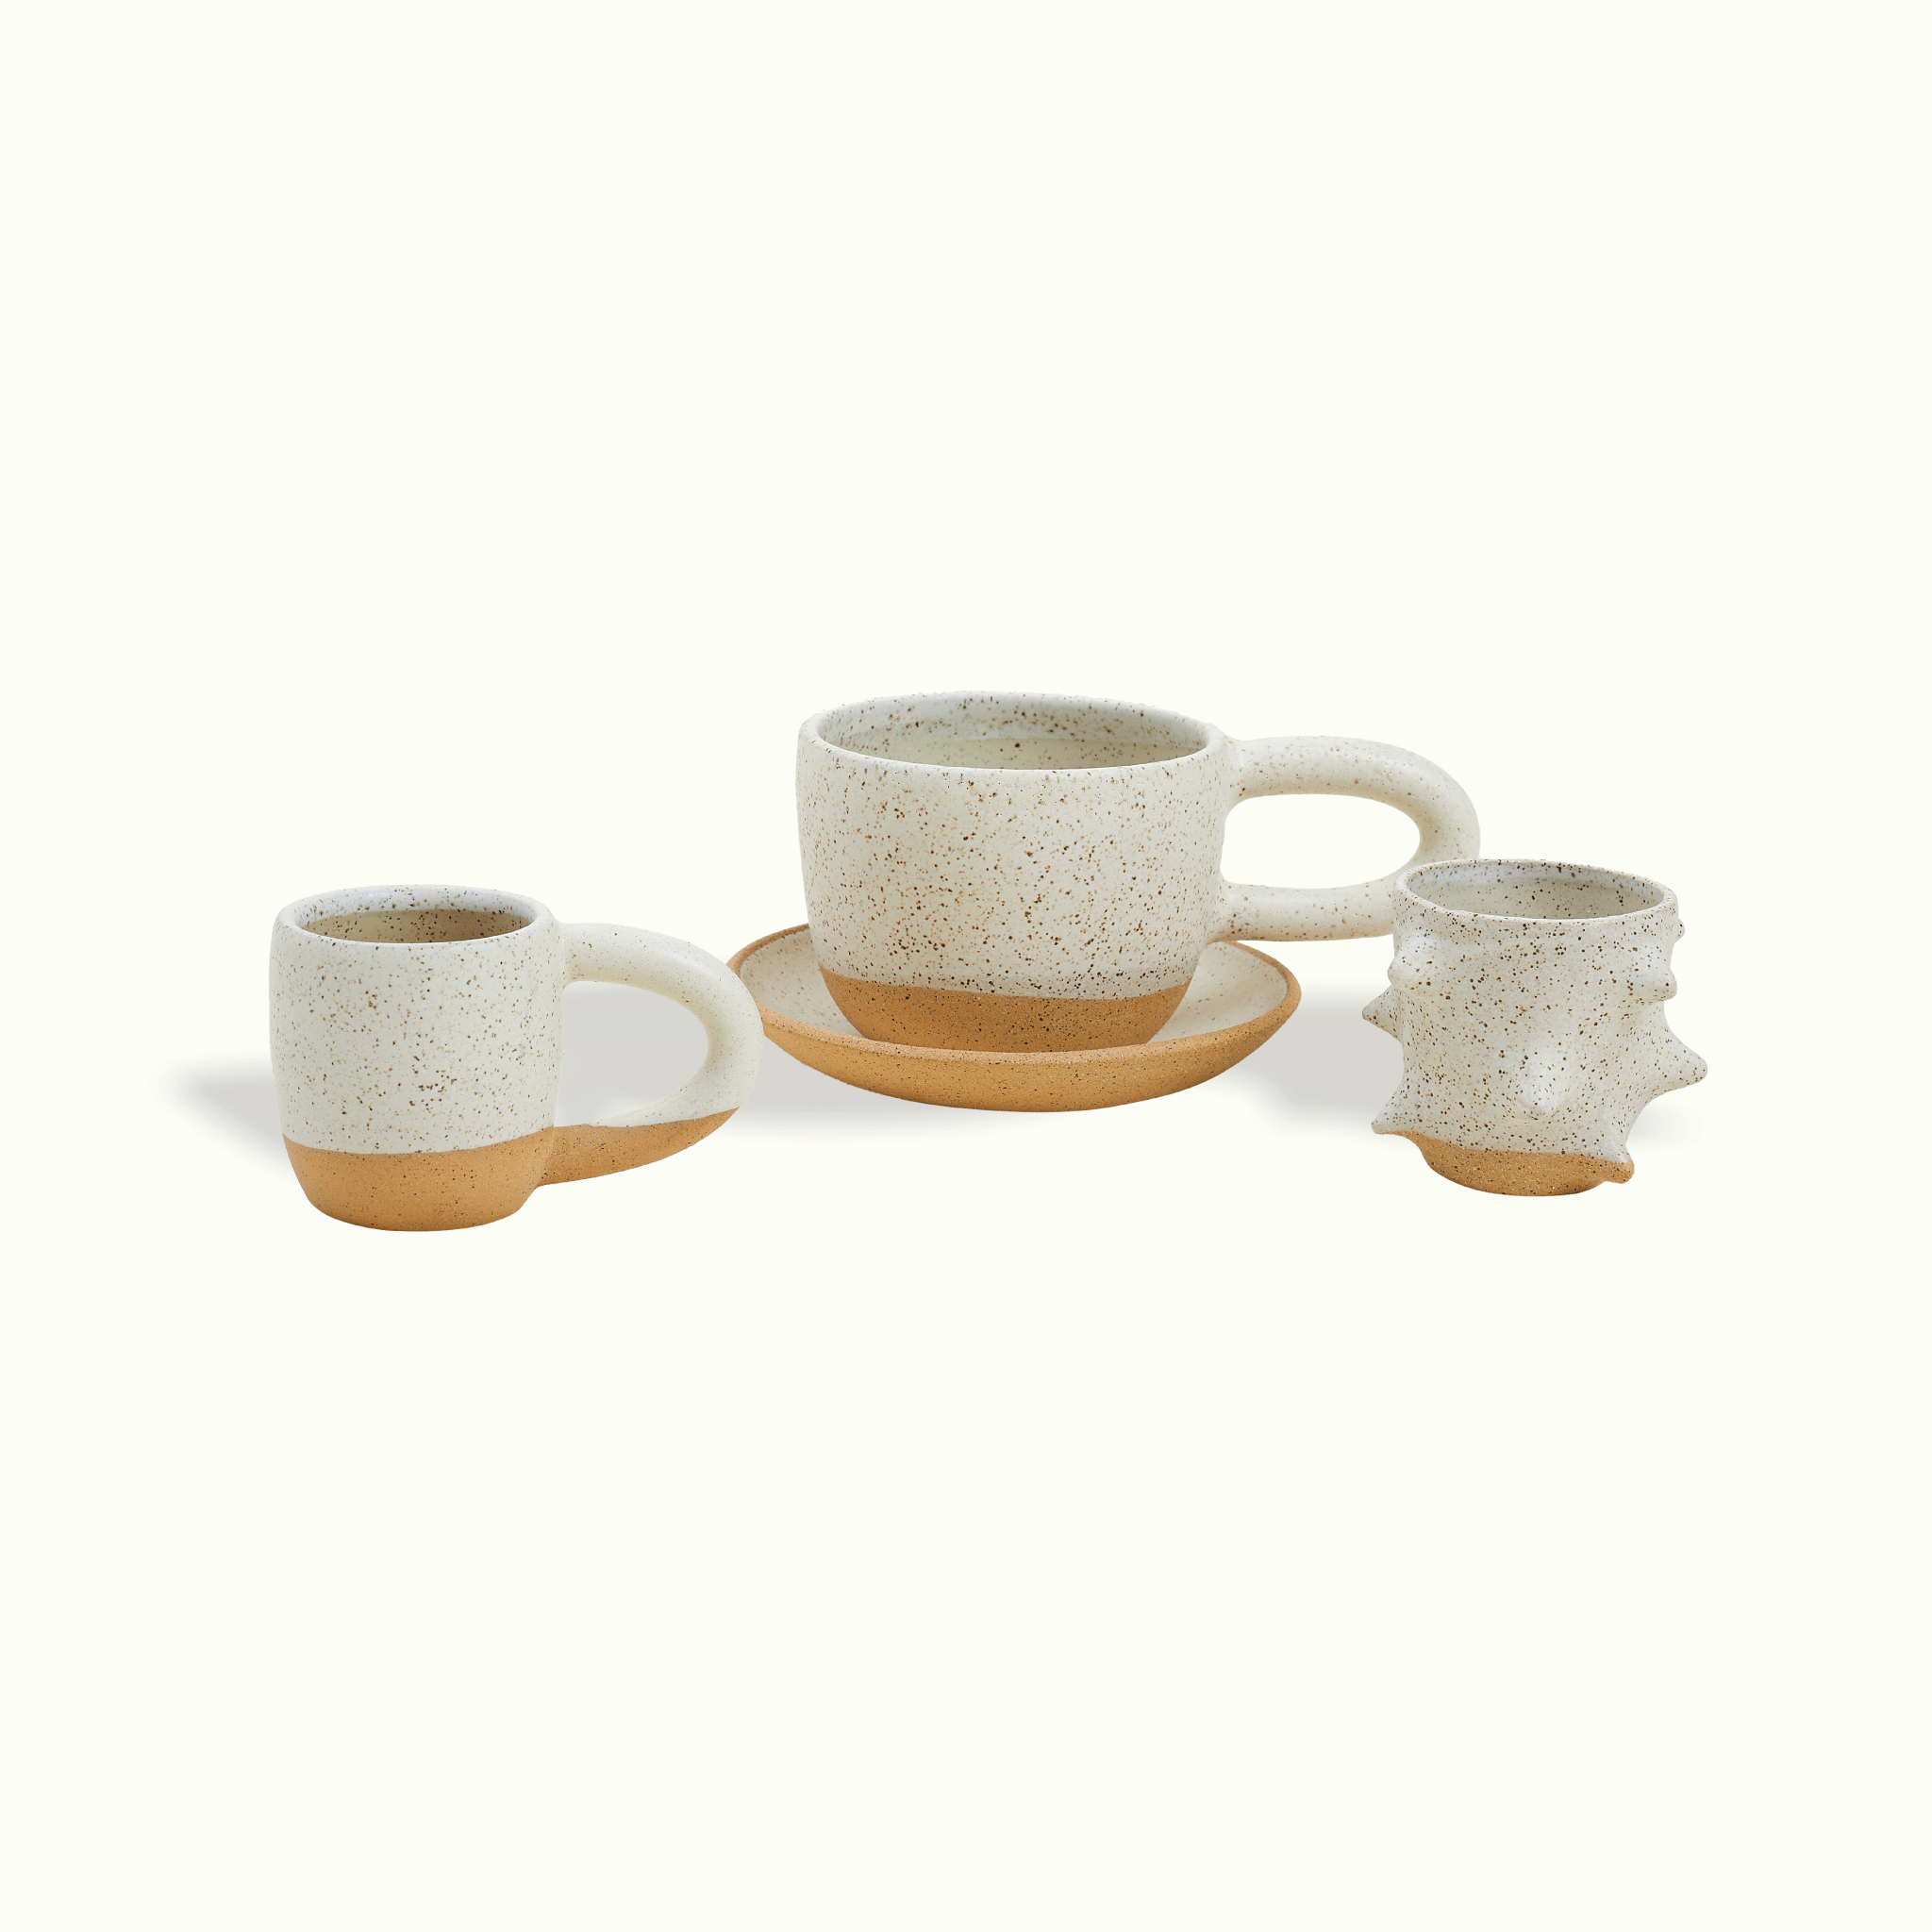 Speckled Clay Latte Mug & Saucer Adriana Lemus Exclusive for Skyview Los Alamos by Nomada Deco